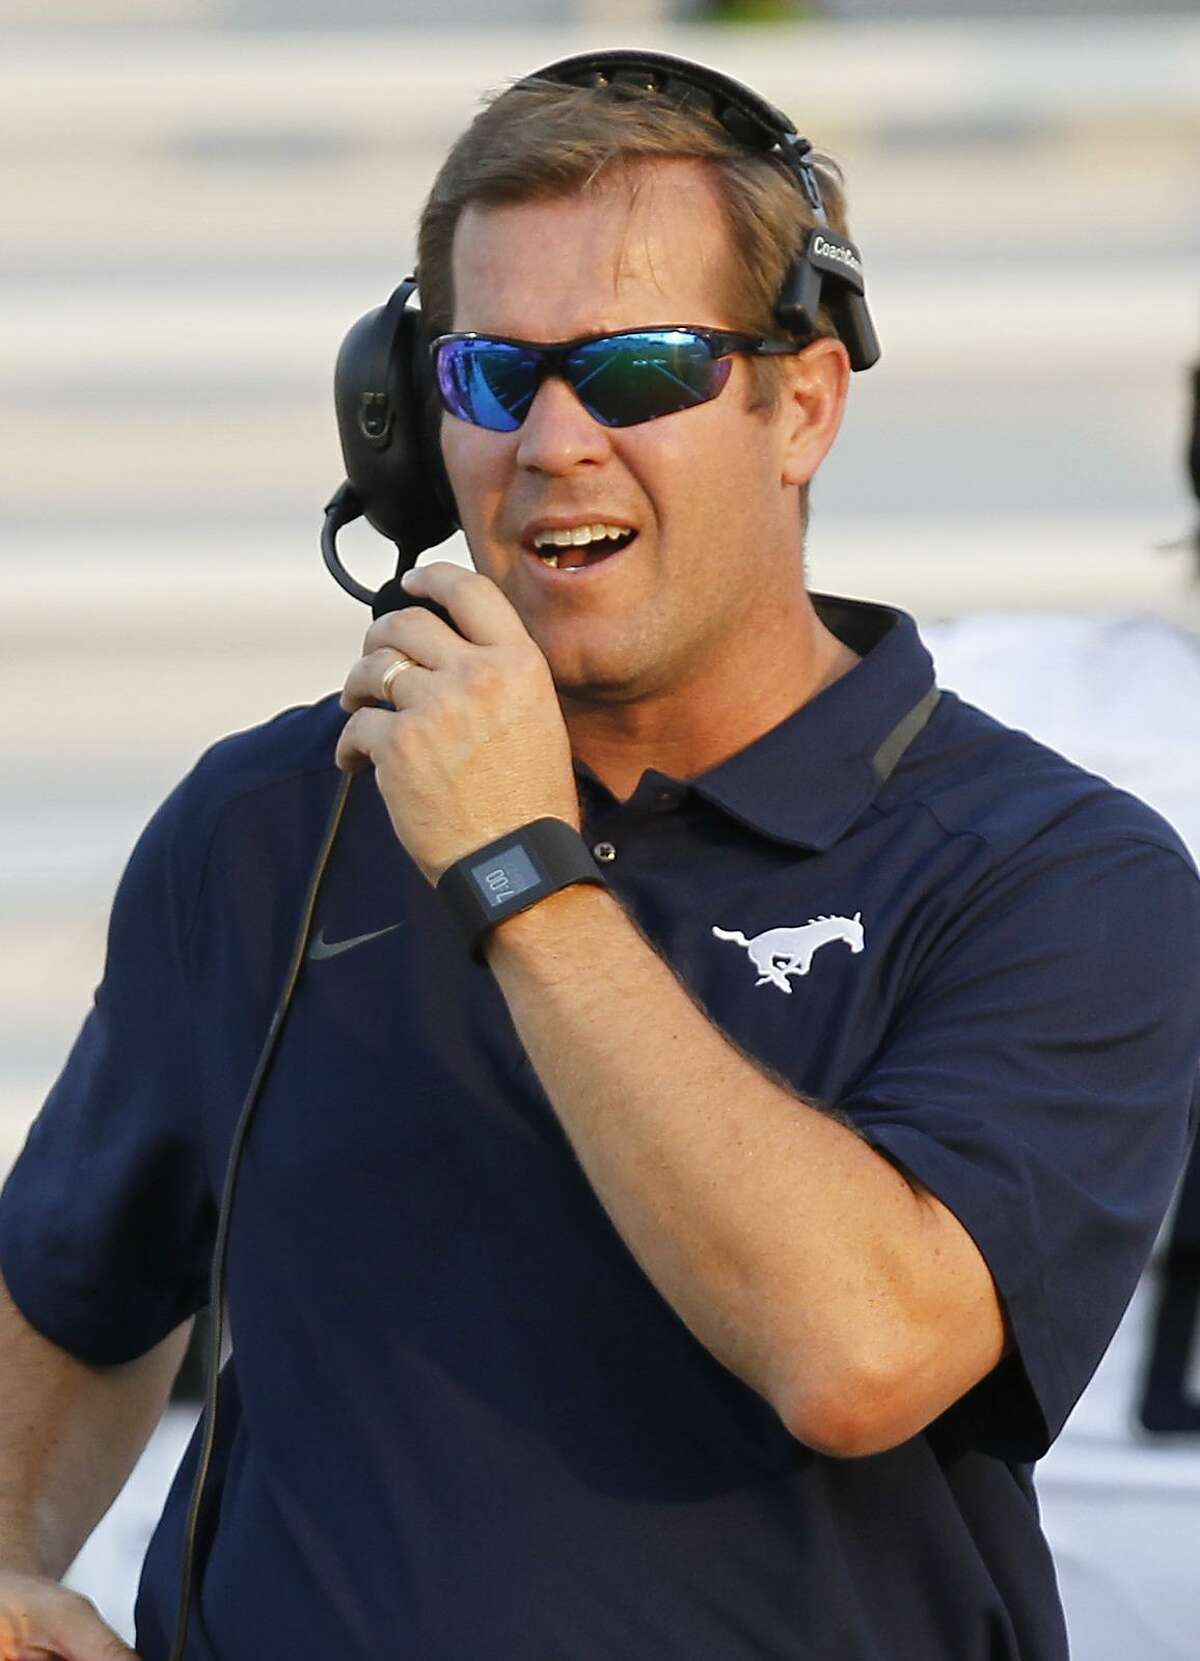 Lamar Consolidated head football coach Rick LaFavers enters his fifth season leading the Mustangs, who broke through with a 7-4 season that included their first playoff berth in six years.